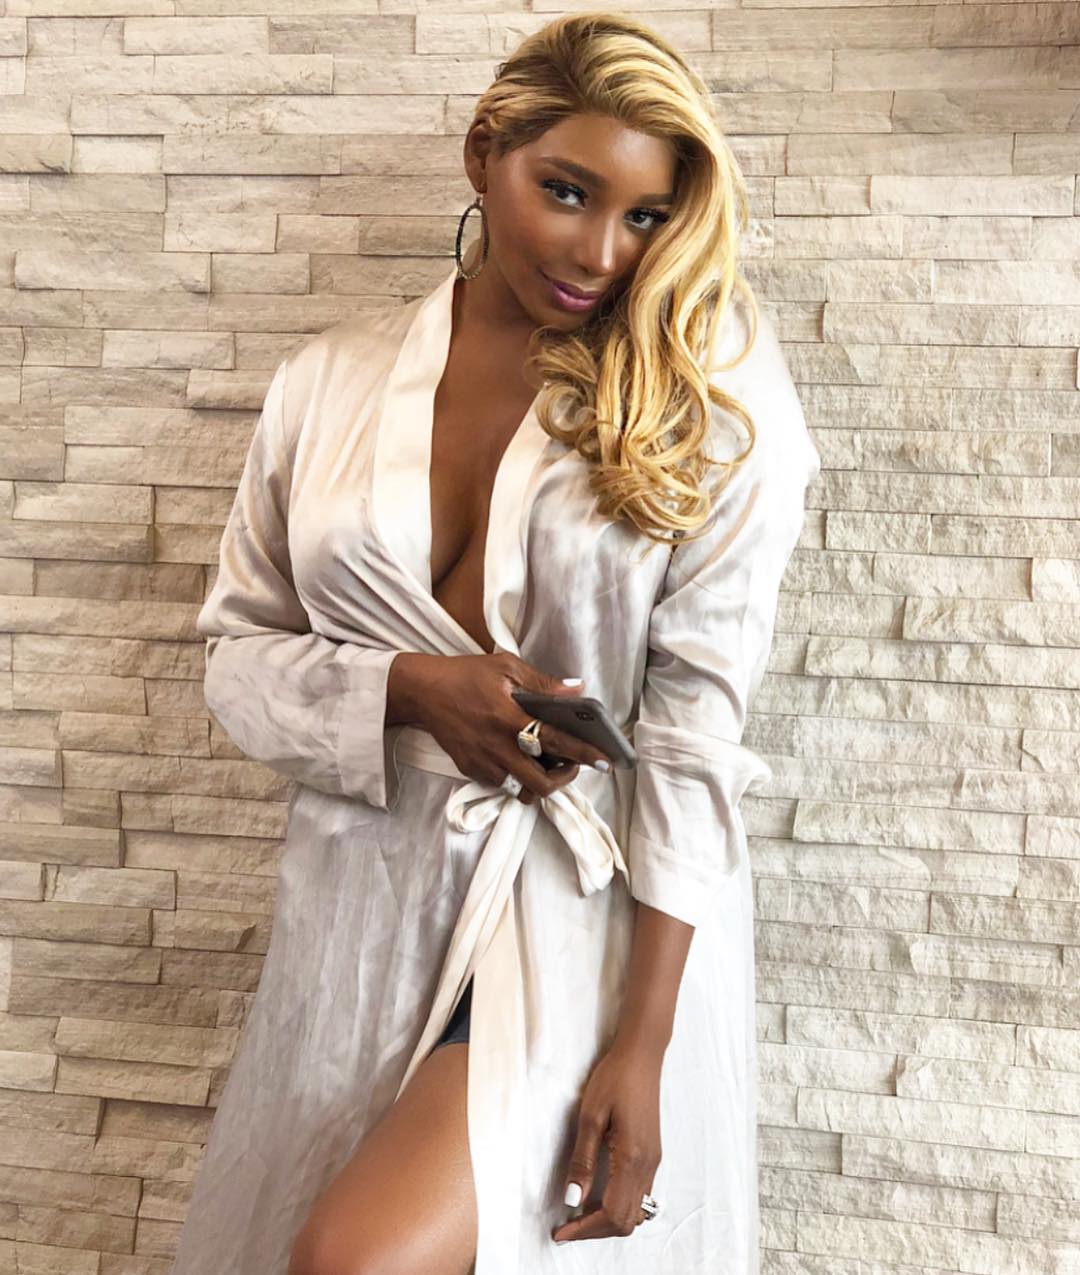 49 Hot Pictures Of NeNe Leakes Which Expose Her Sexy Hour- glass Figure | Best Of Comic Books